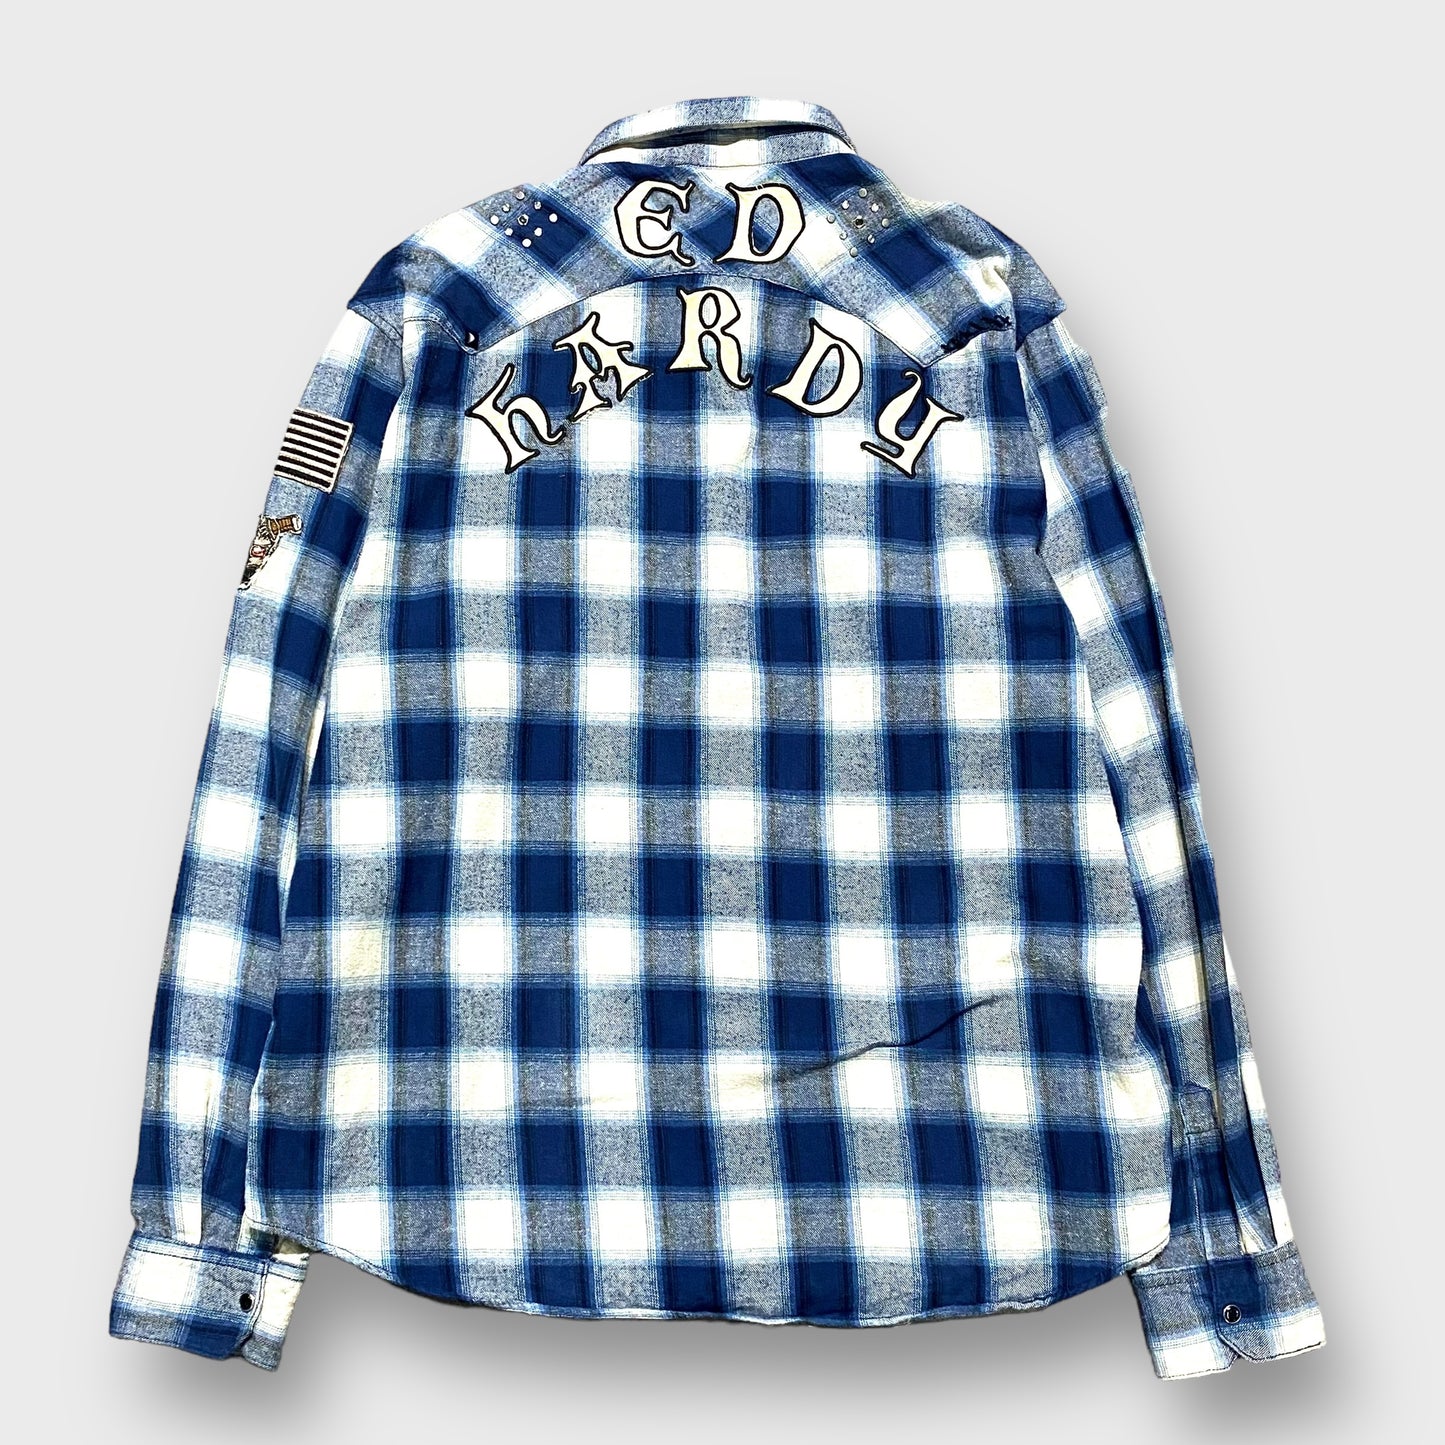 "Ed Hardy" Ombre check pattern western shirt